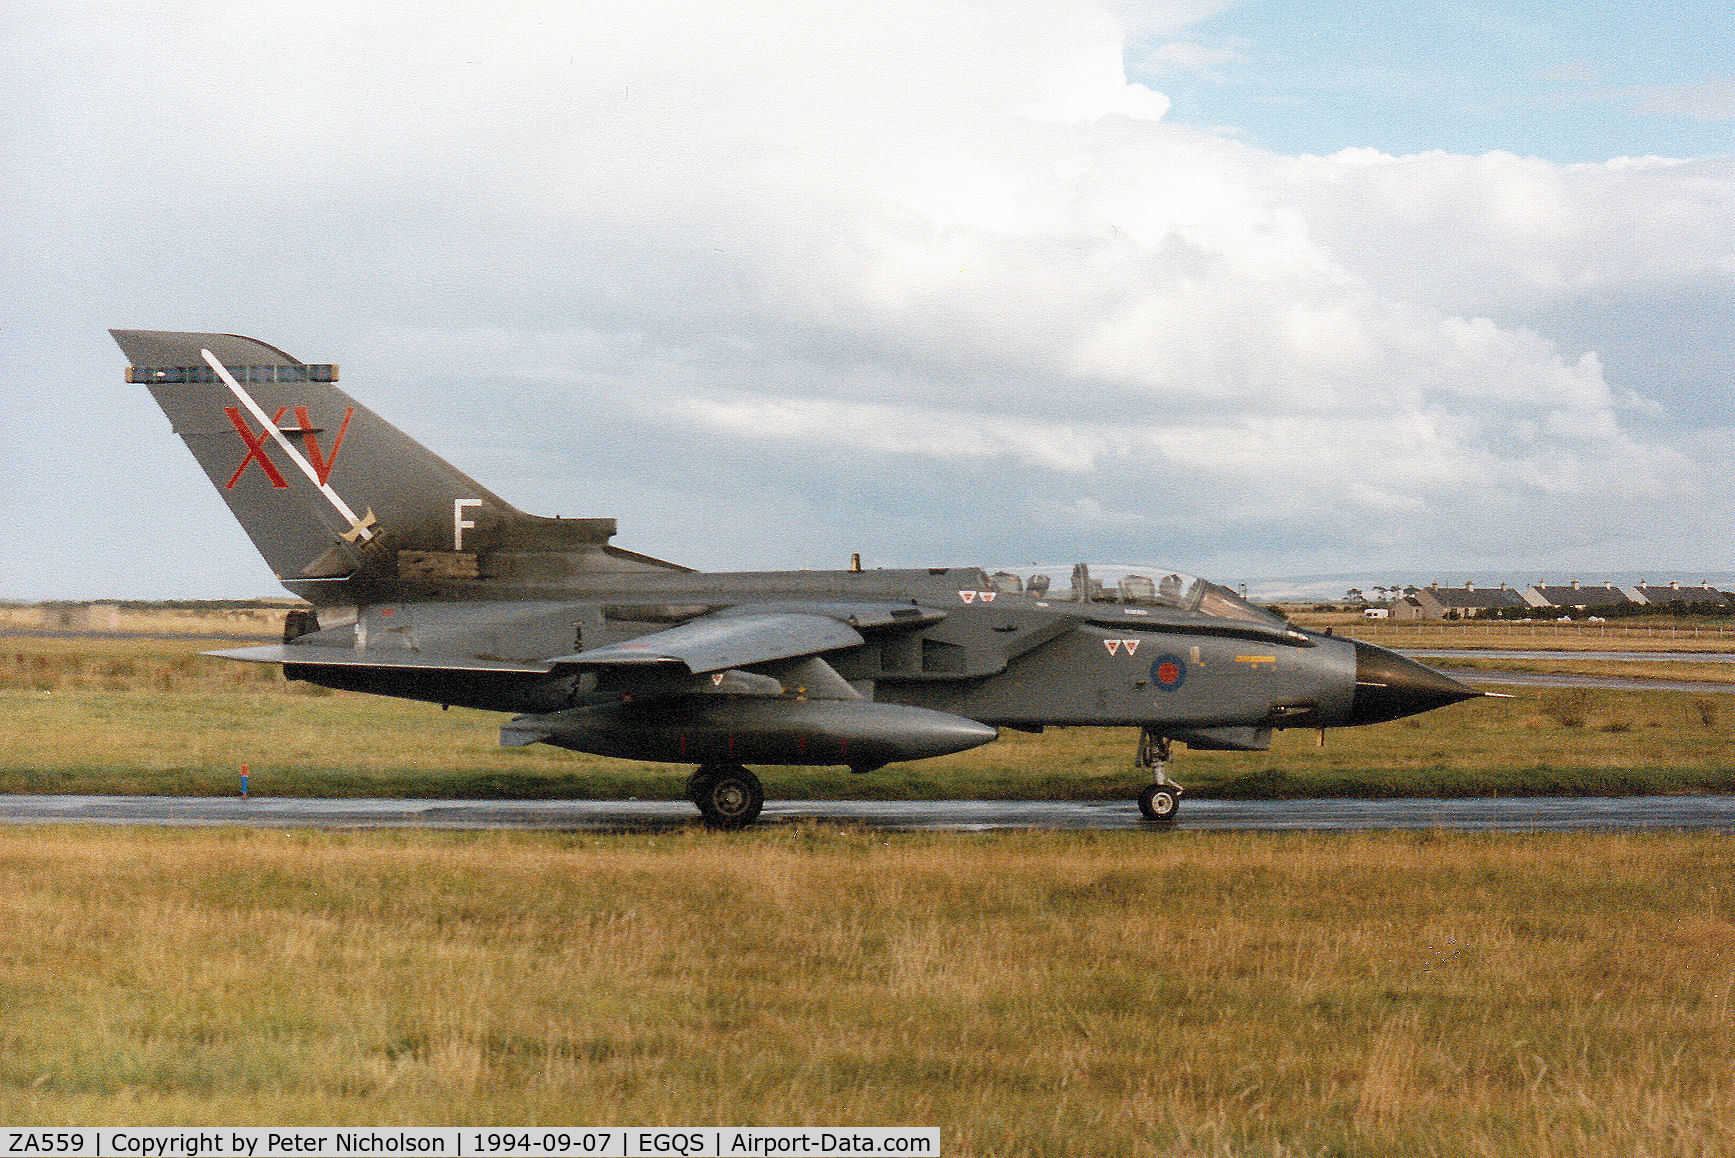 ZA559, 1981 Panavia 081/BS023/3043 C/N 081/BS023/3043, Tornado GR.1, callsign Mitre 3, of 15(Reserve) Squadron awaiting clearance to join Runway 05 at RAF Lossiemouth in September 1994.